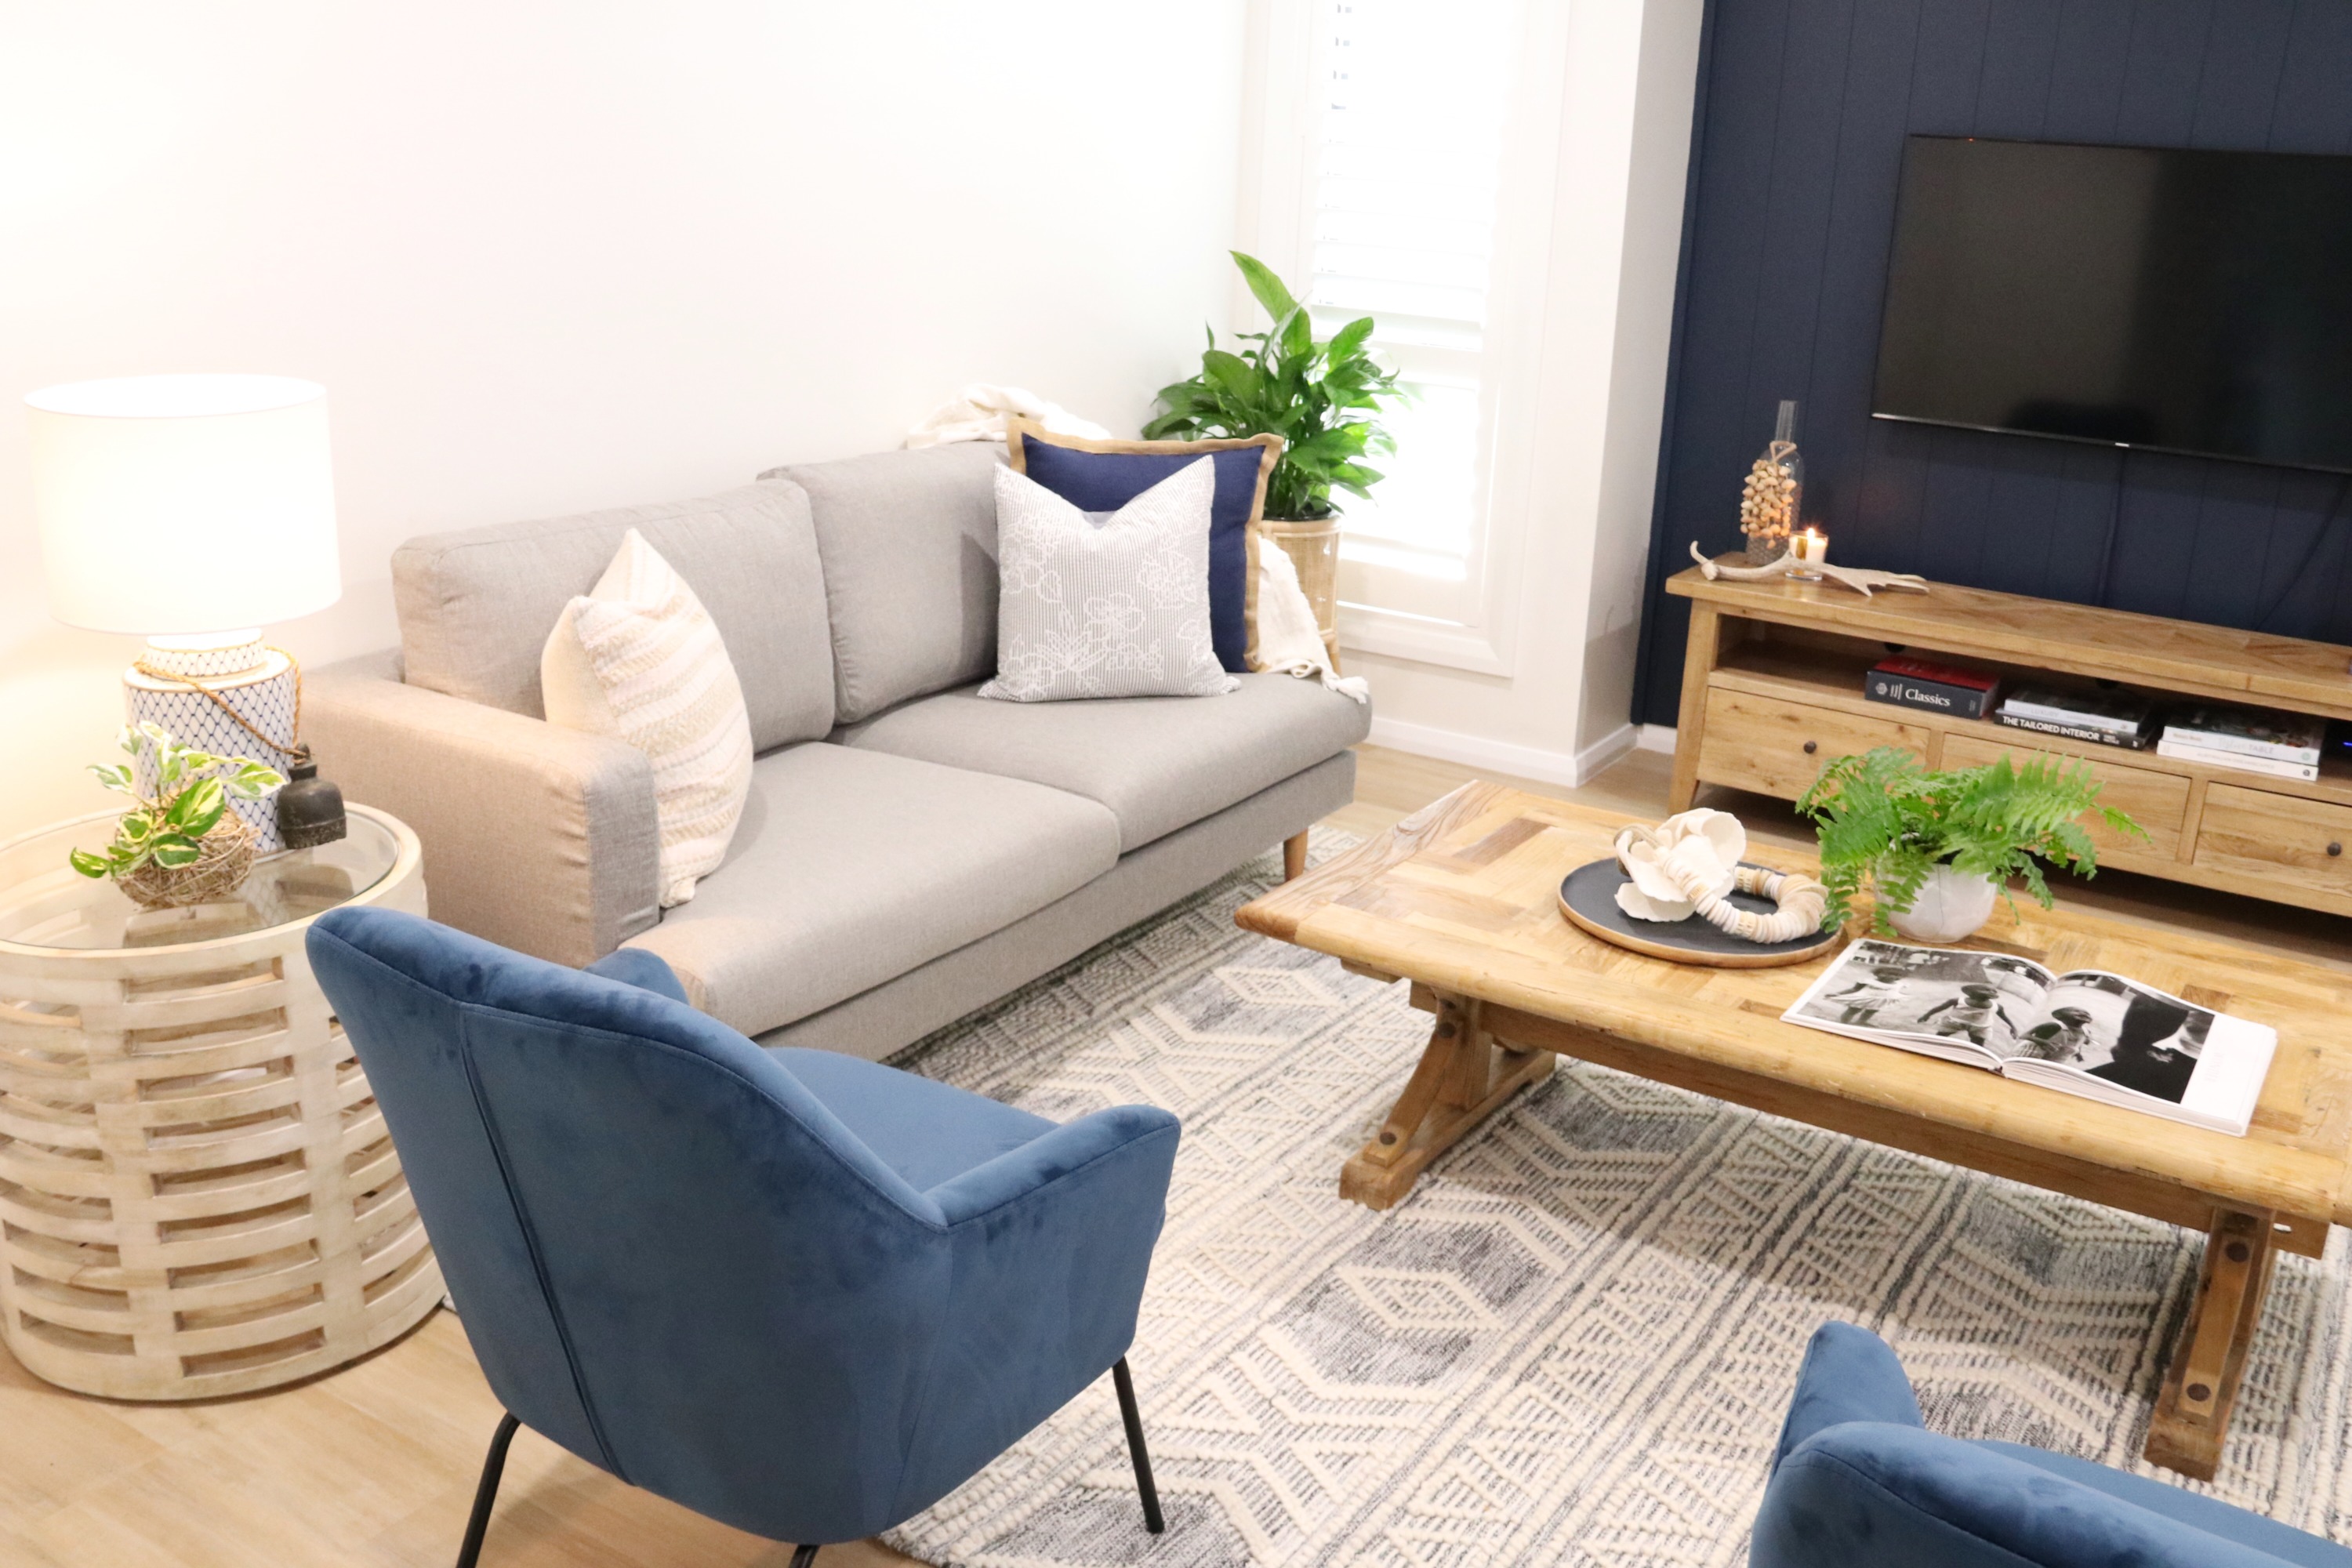 Living room layout: a space for TV and conversation! - The Interiors Addict